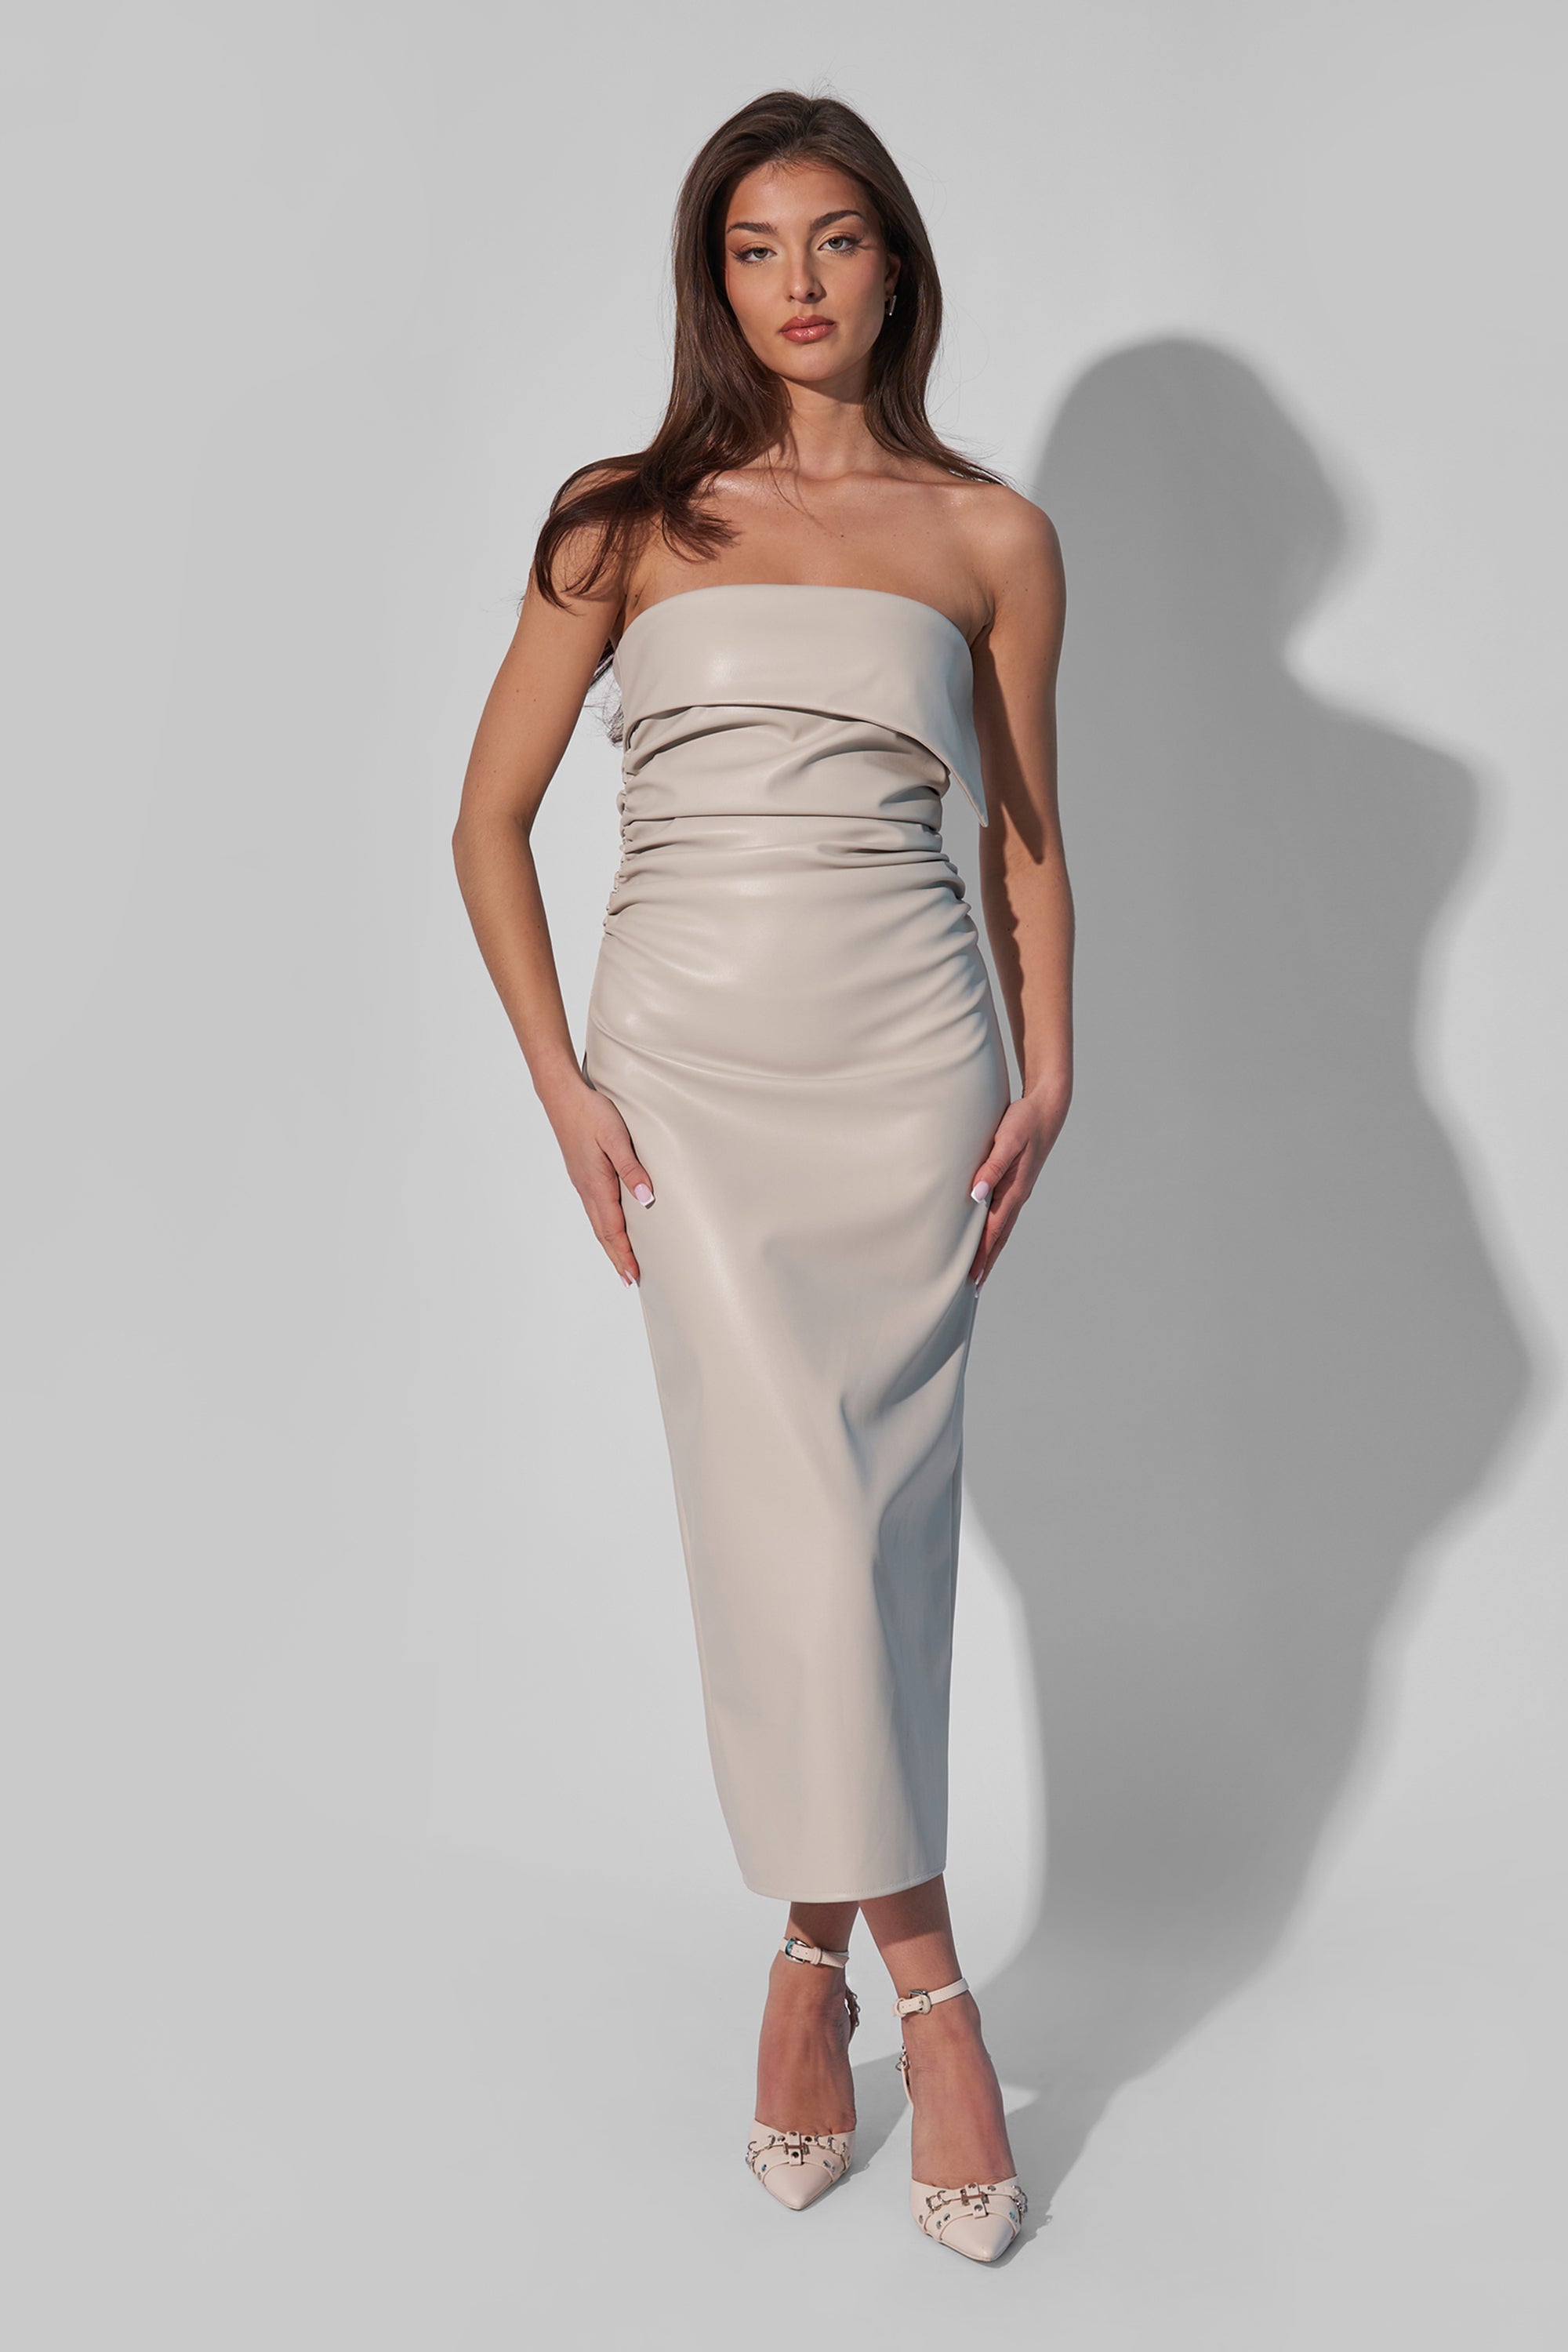 Image of Kaiia Leather Look Ruched Bandeau Midaxi Dress in Ecru